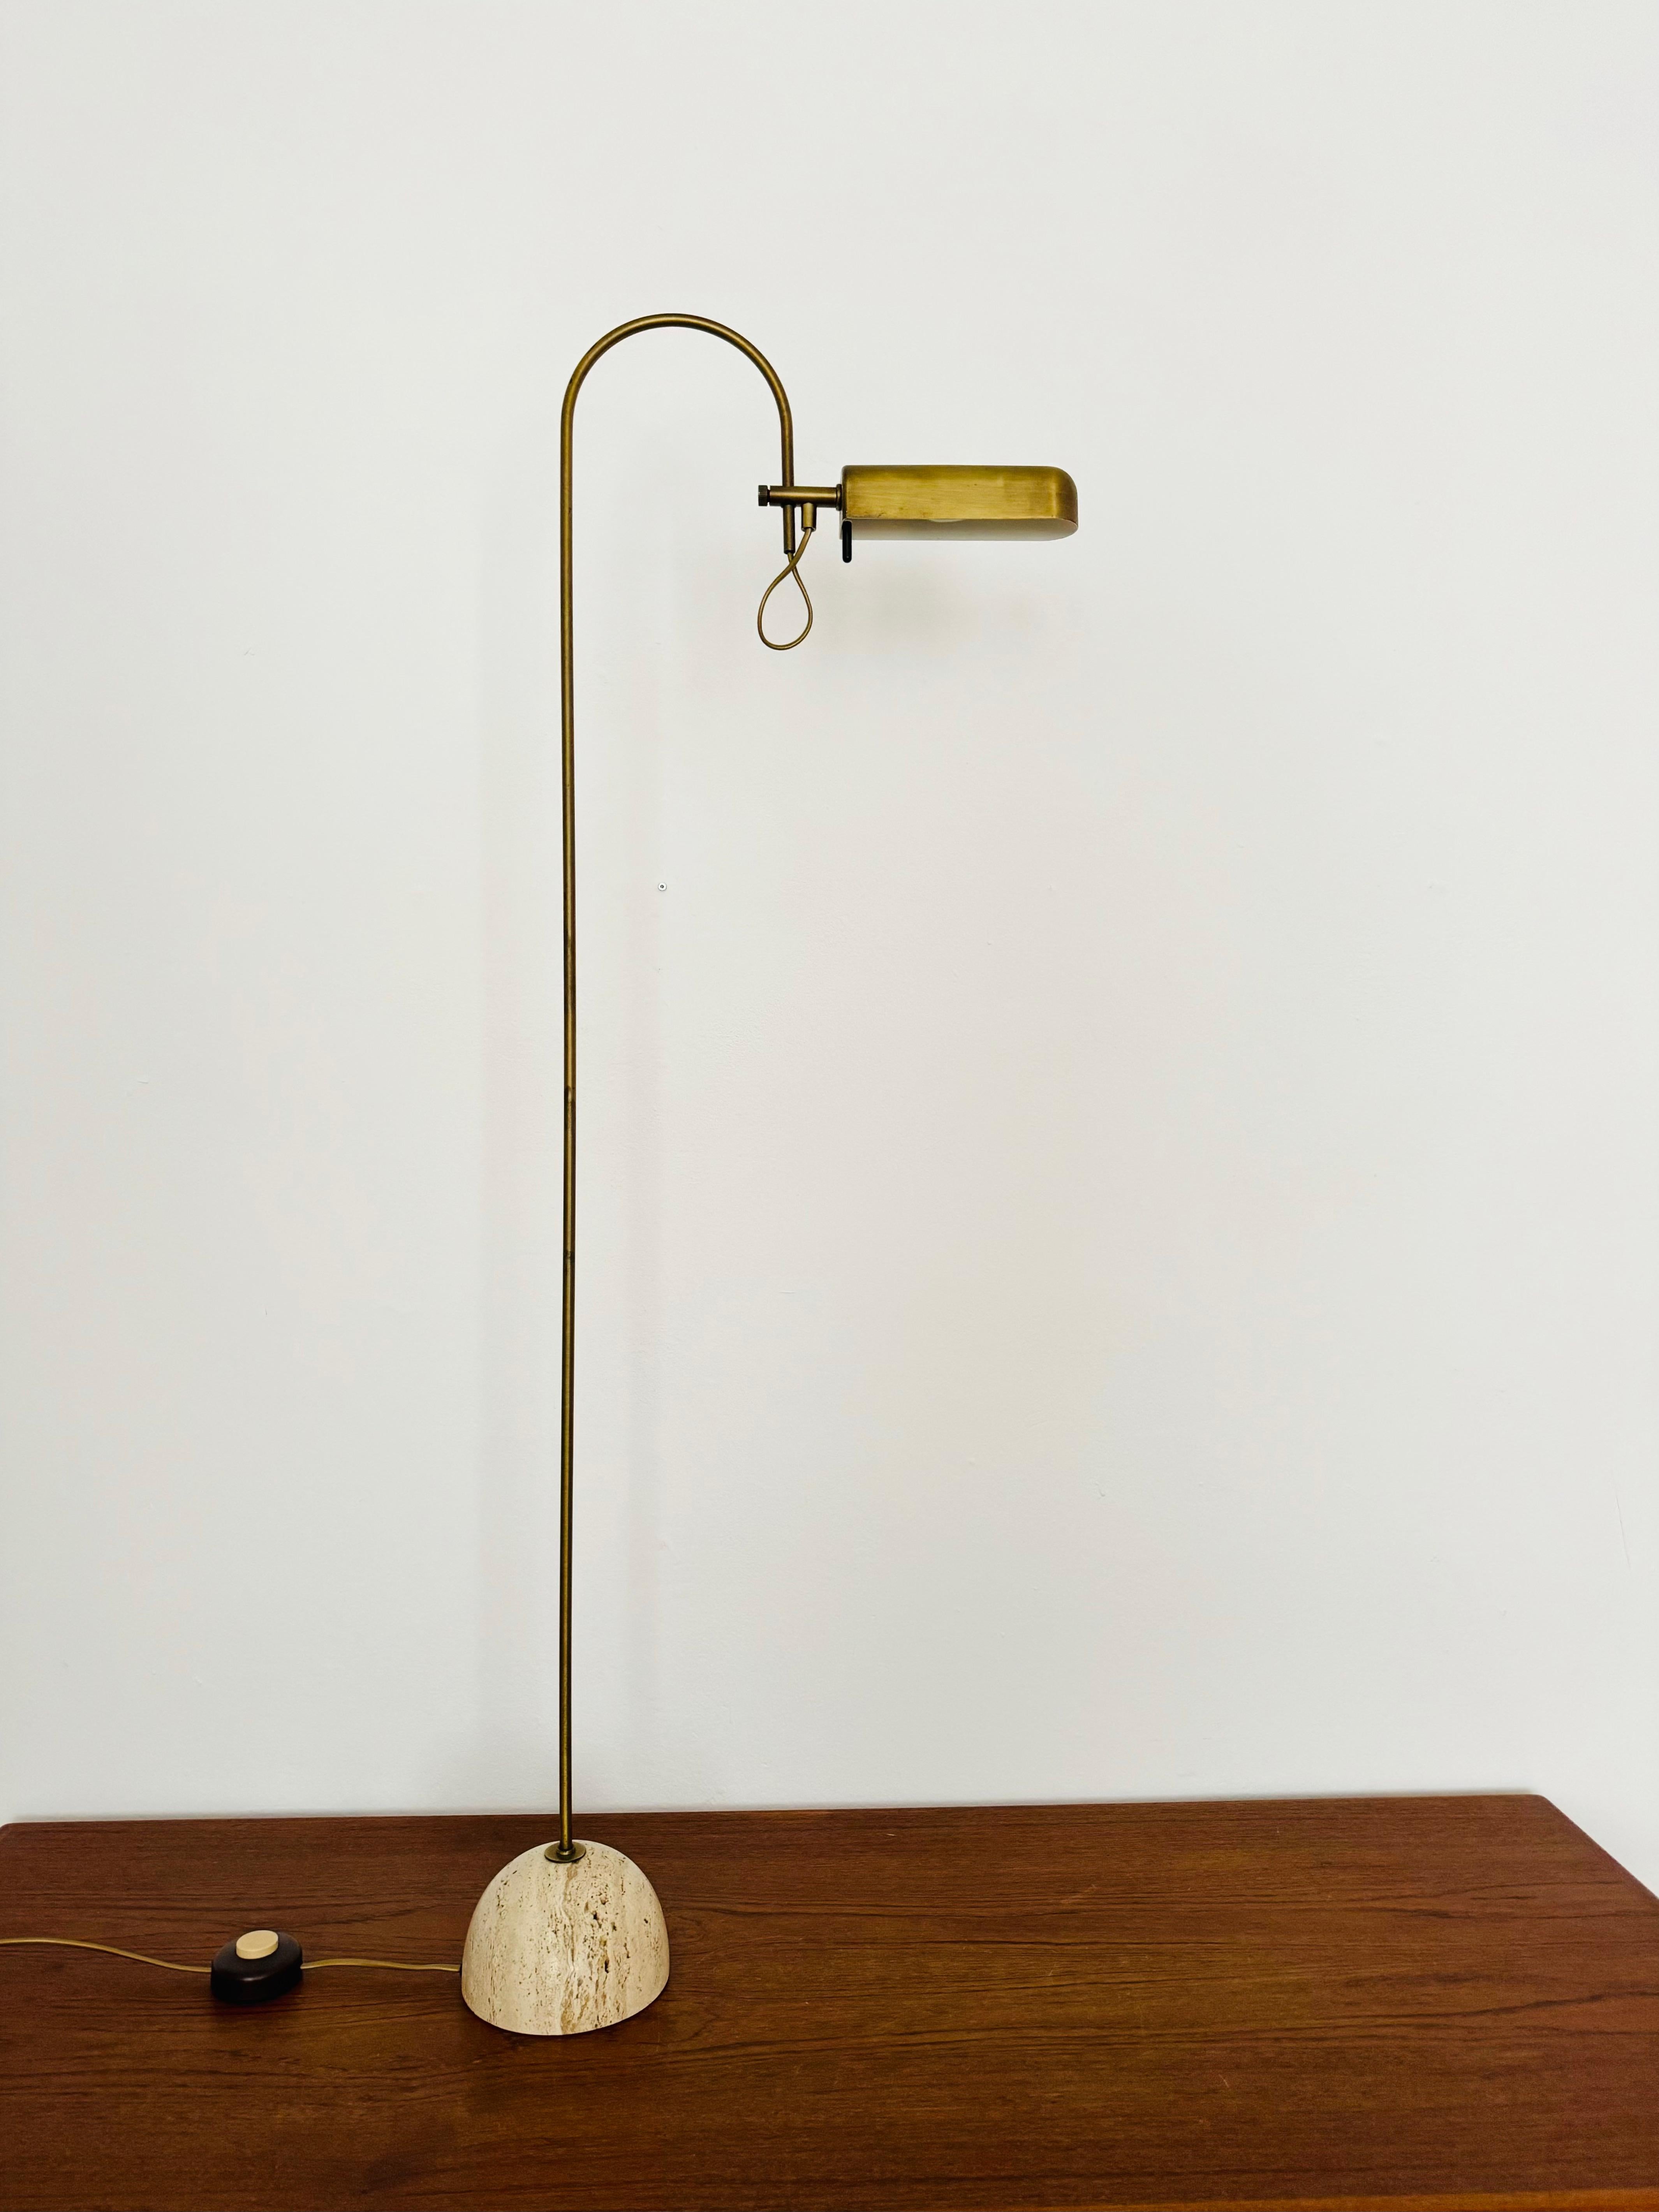 Stunning floor lamp from the 1970s.
Very unusual design and very high-quality workmanship.
The lamp head is individually adjustable.
The travertine base is particularly beautiful.
An absolute highlight for every home.

Condition:

Very good vintage